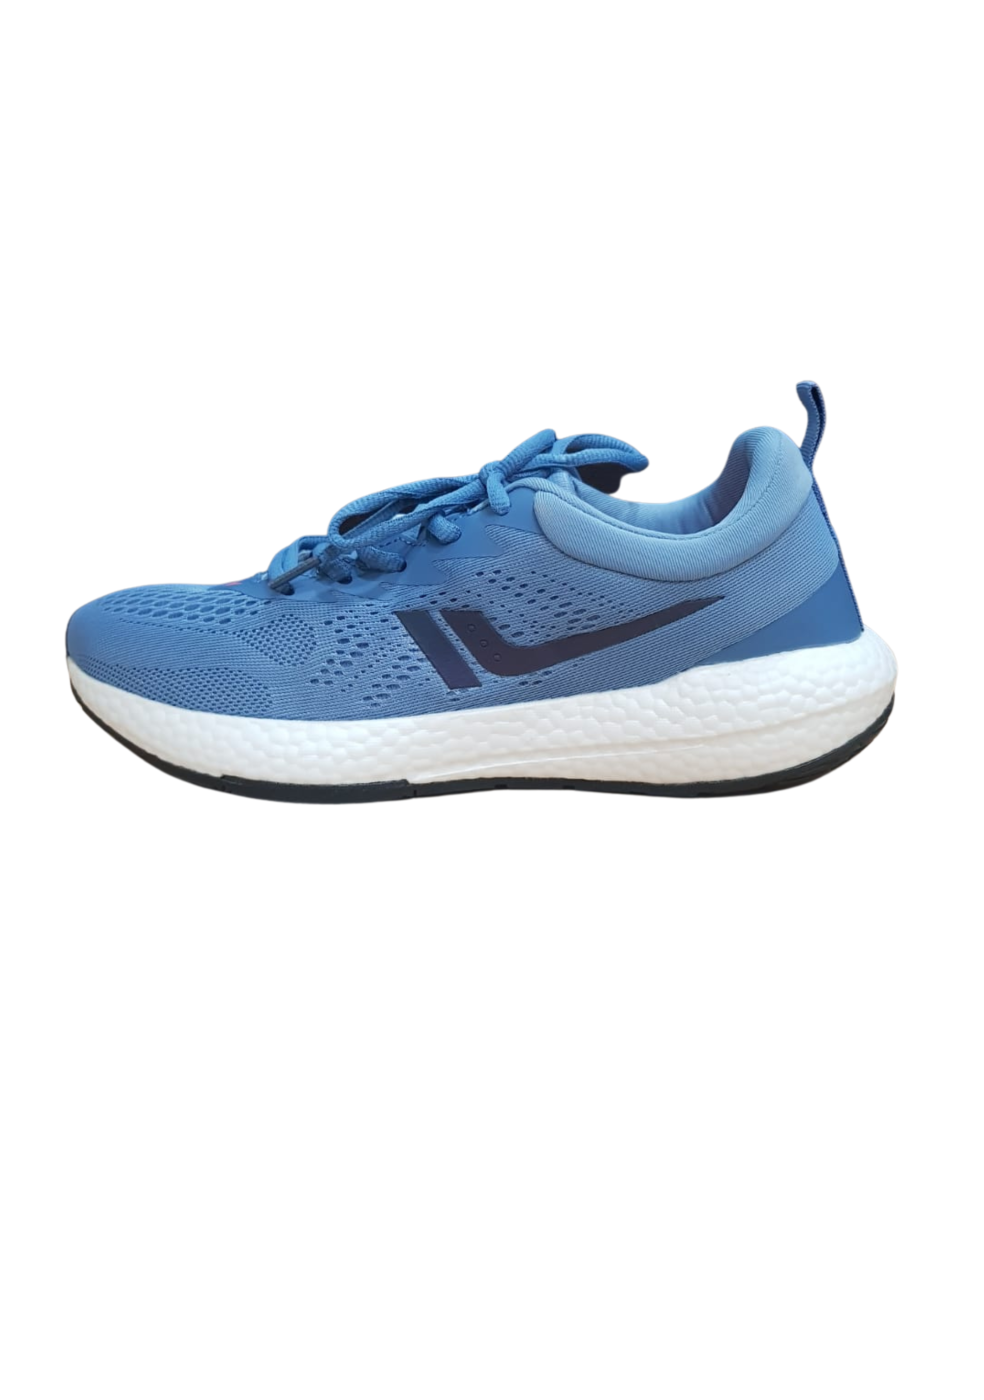 CLT Stylish Sports Shoes For Men